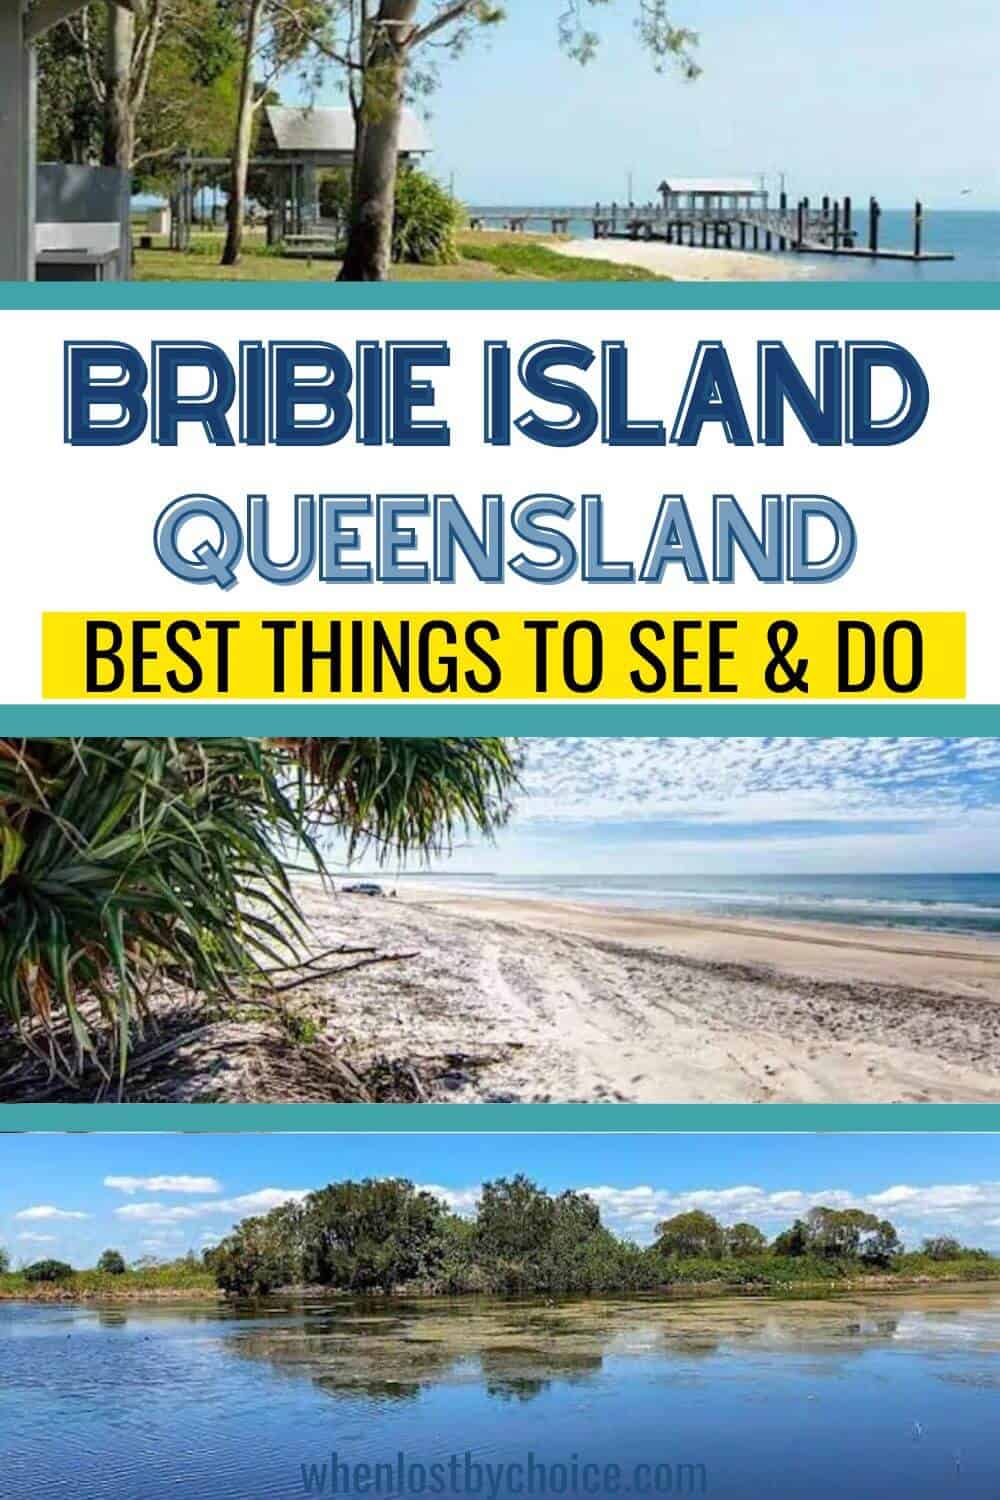 best things to do on bribie island queensland with photo collage